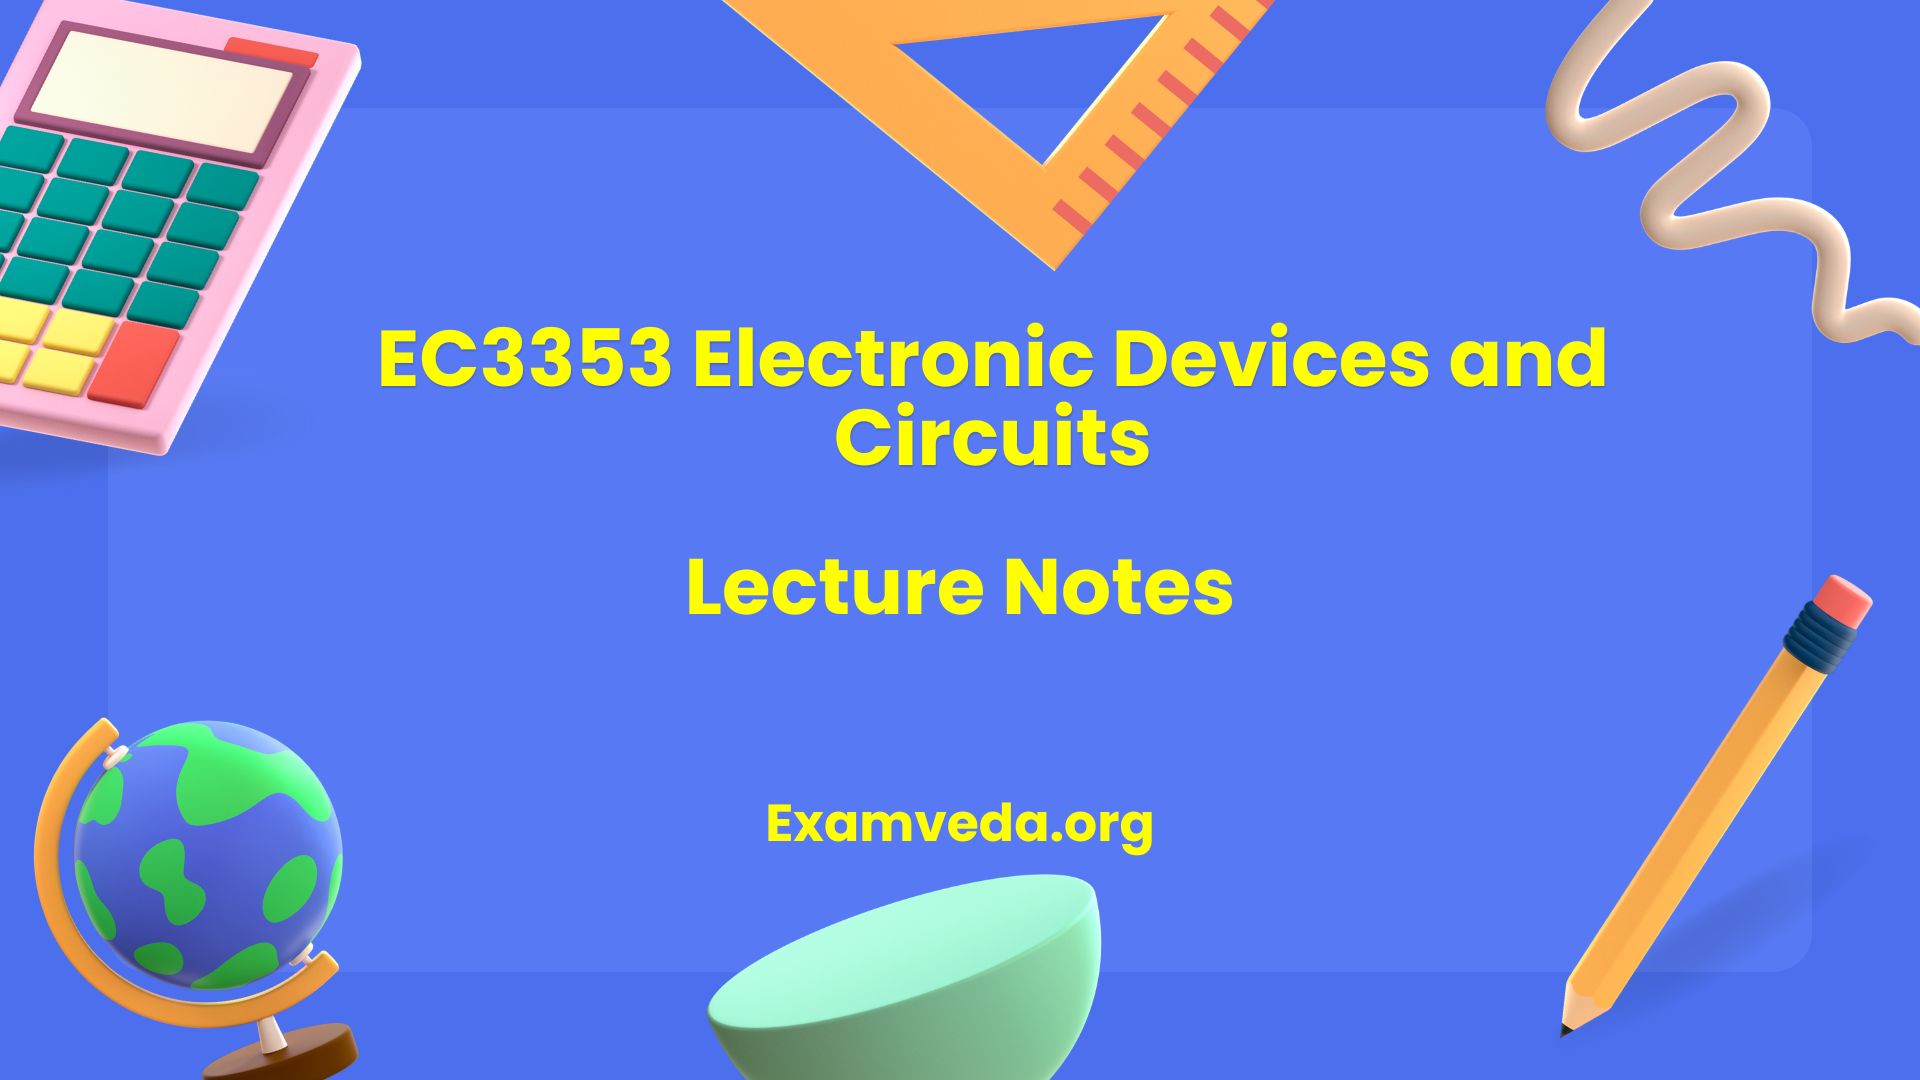 EC3353 Electronic Devices and Circuits Lecture Notes